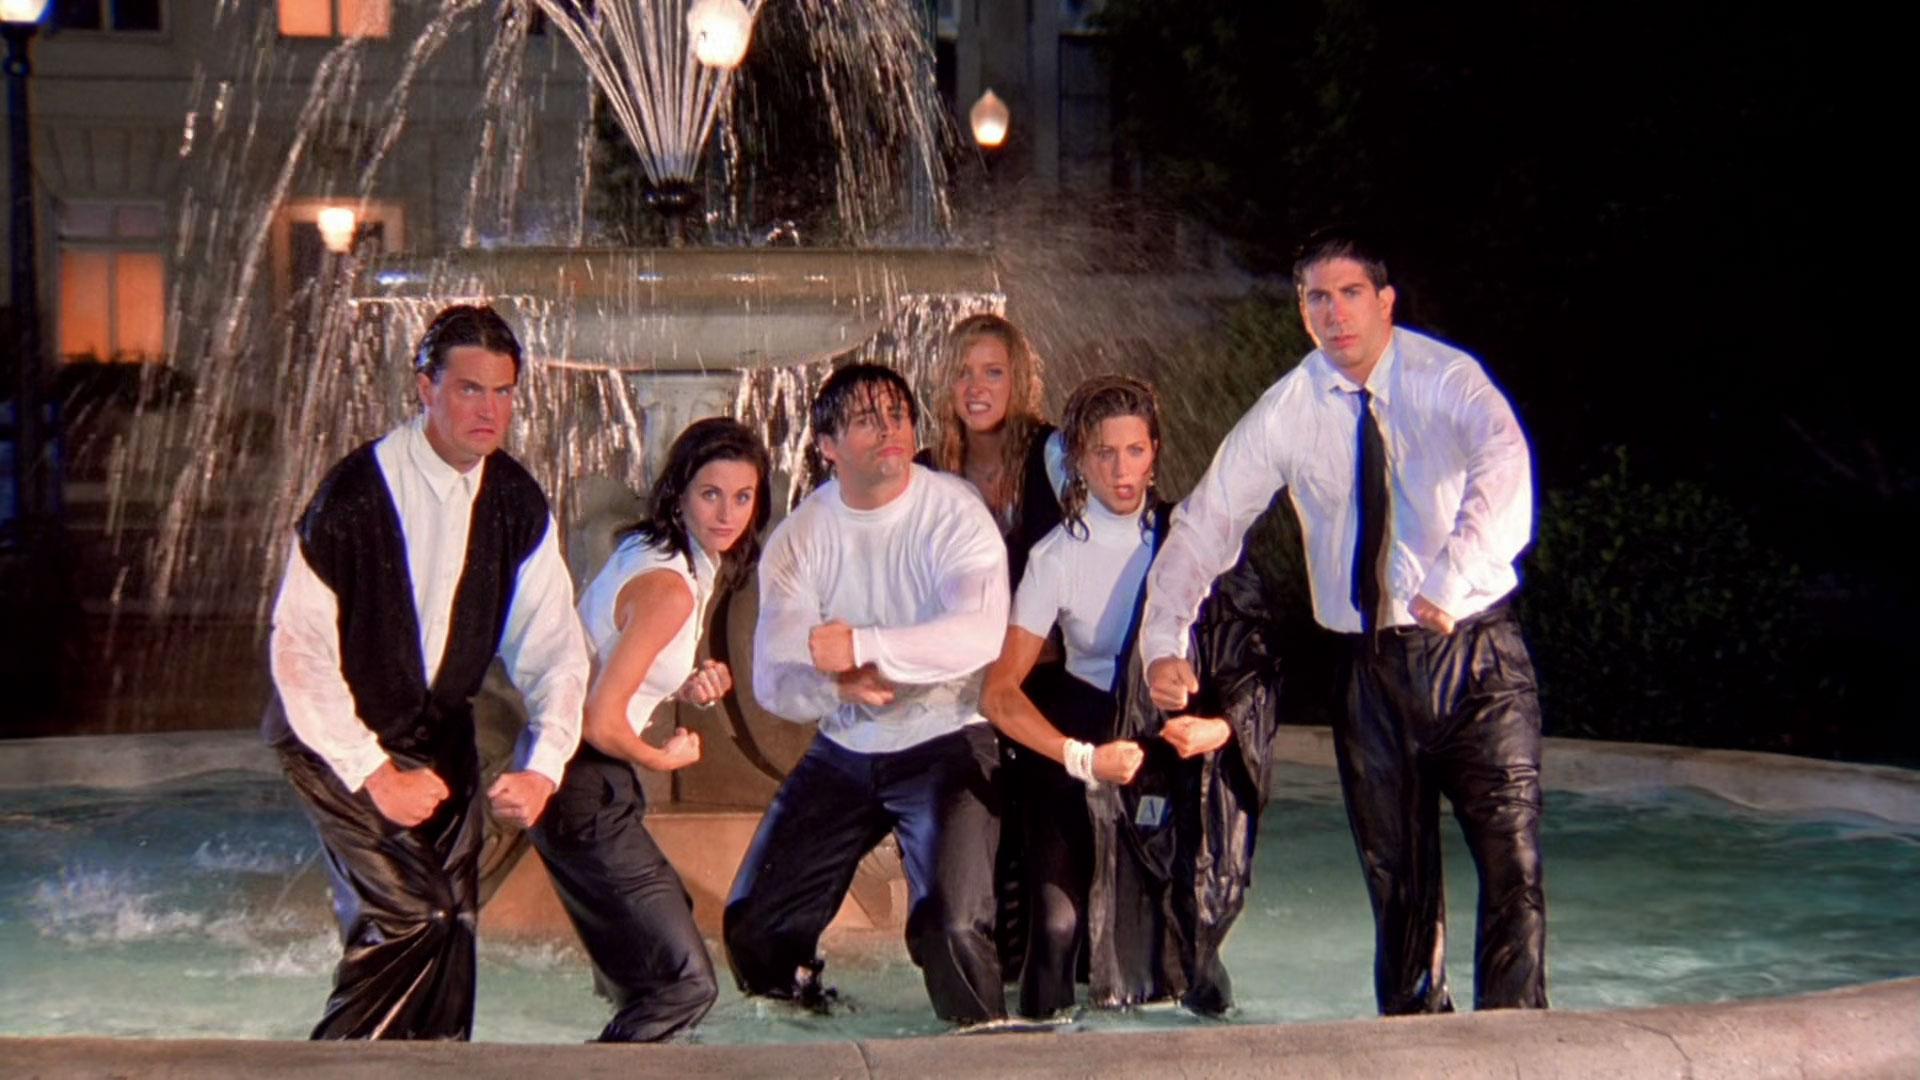 The cast of Friends in the famous fountain